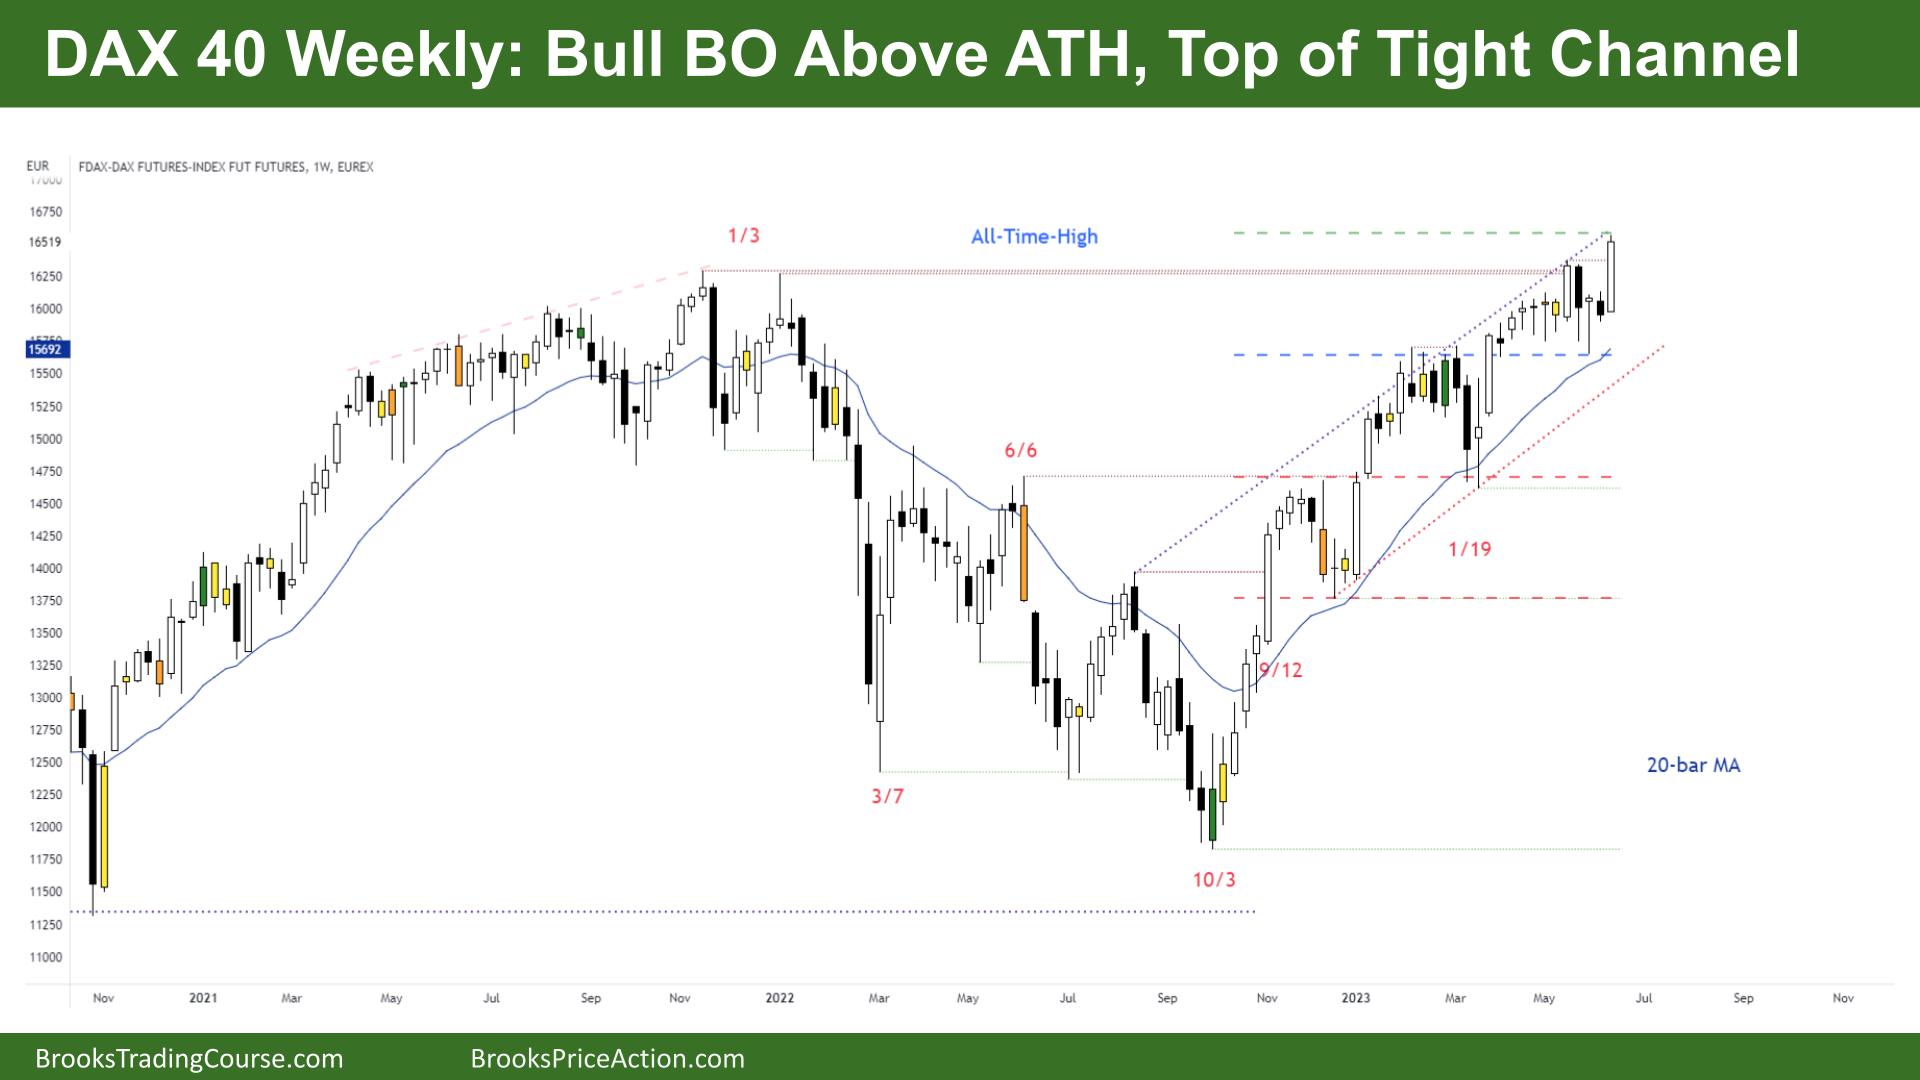 DAX 40 Weekly Bull BO Above ATH, Top of Tight Channel